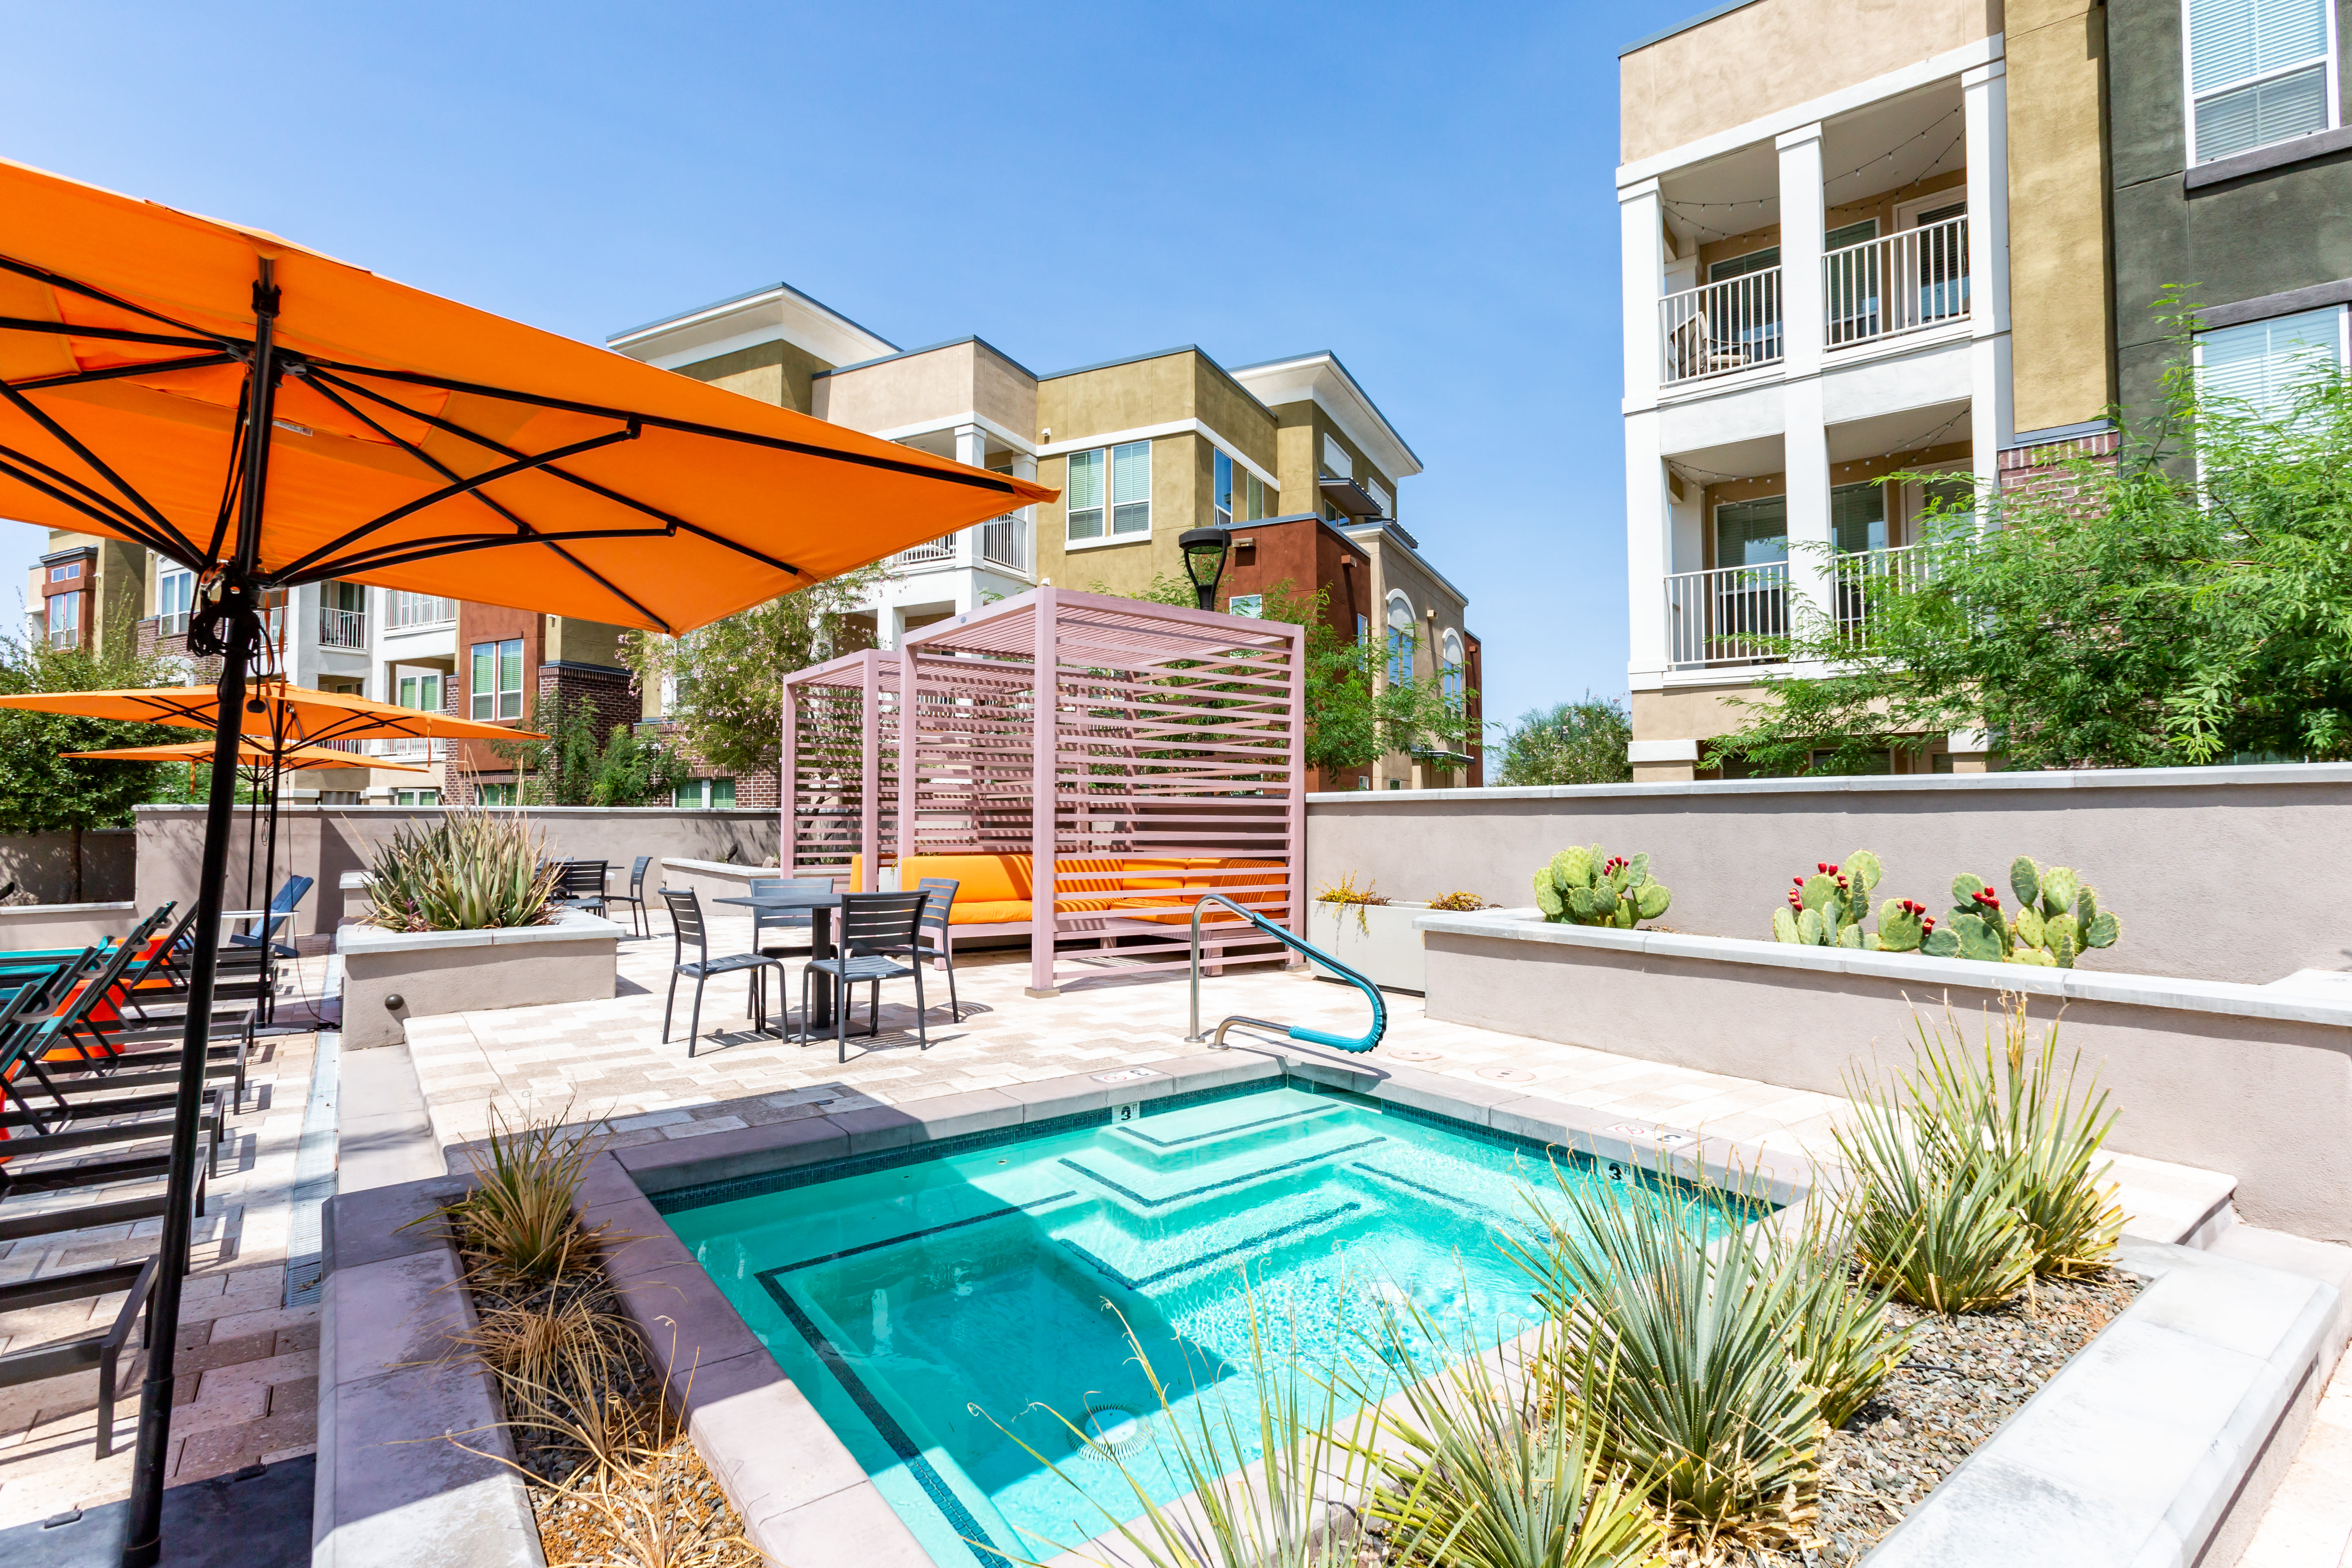 Children's splash area and poolside cabanas at Town Commons in Gilbert, Arizona